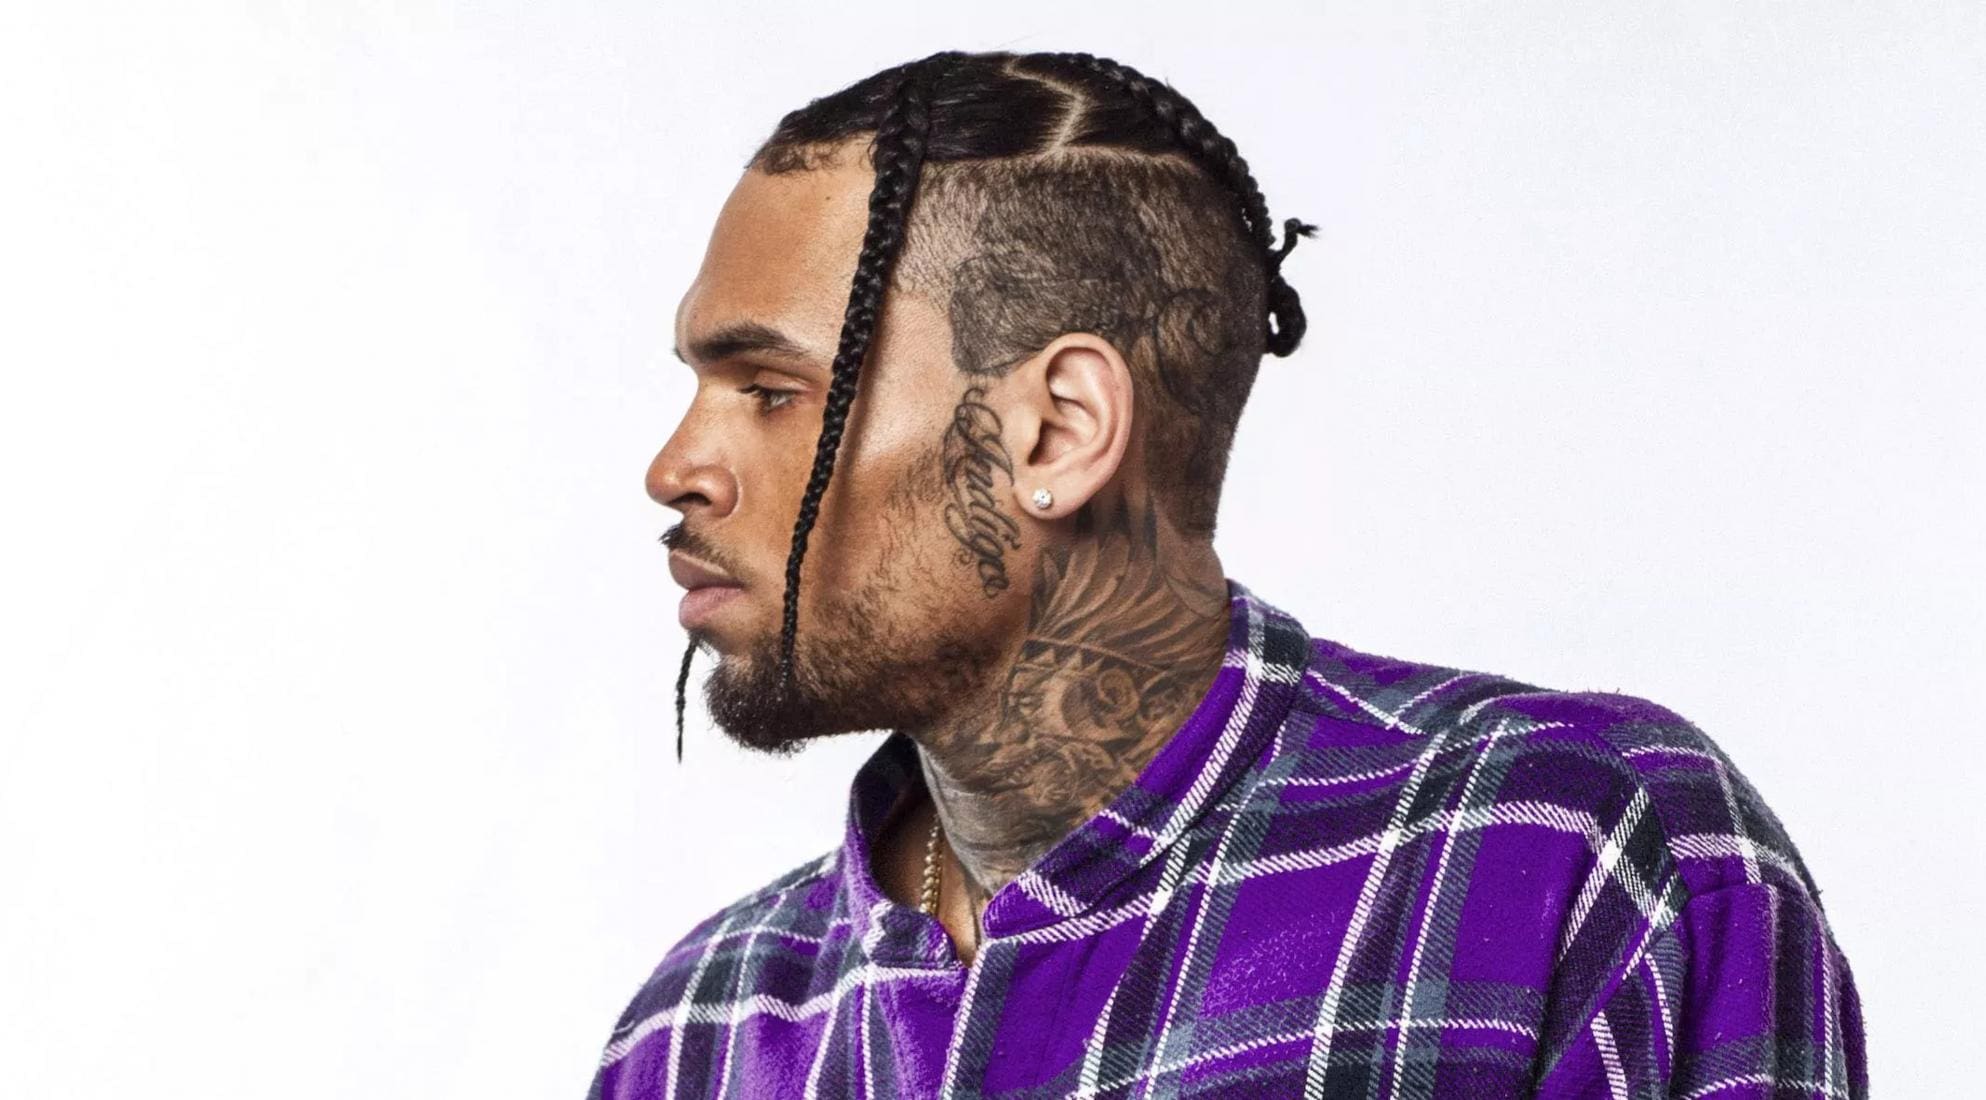 Chris Brown Sends Prayers To His Fans Amidst The Global Coronavirus Pandemic